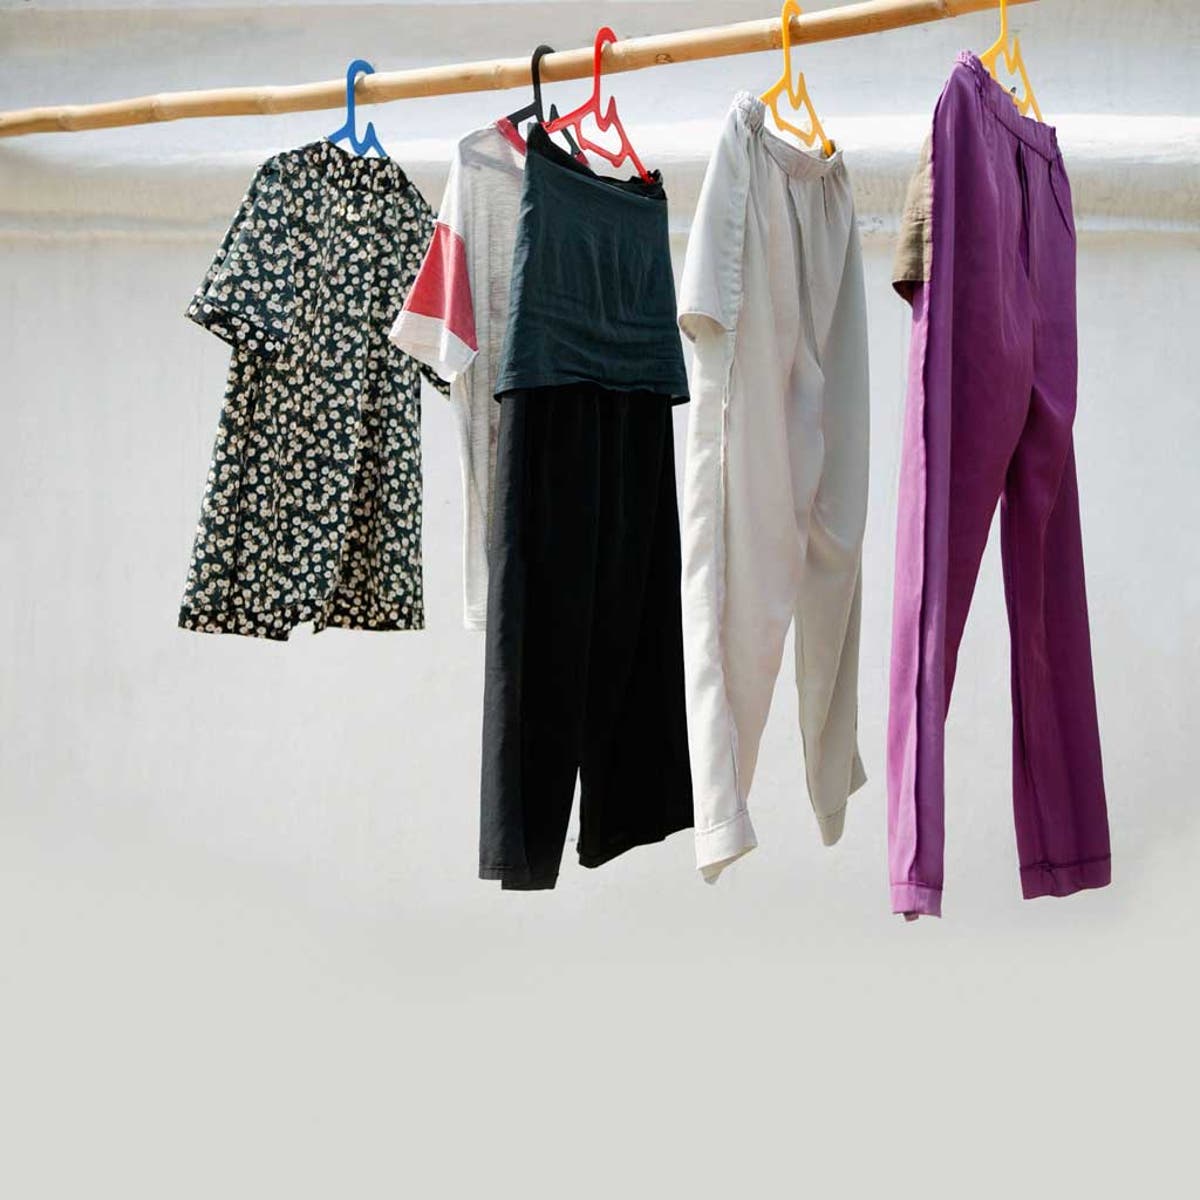 The Insider How To Dry Laundry Indoors The Independent The Independent 3127